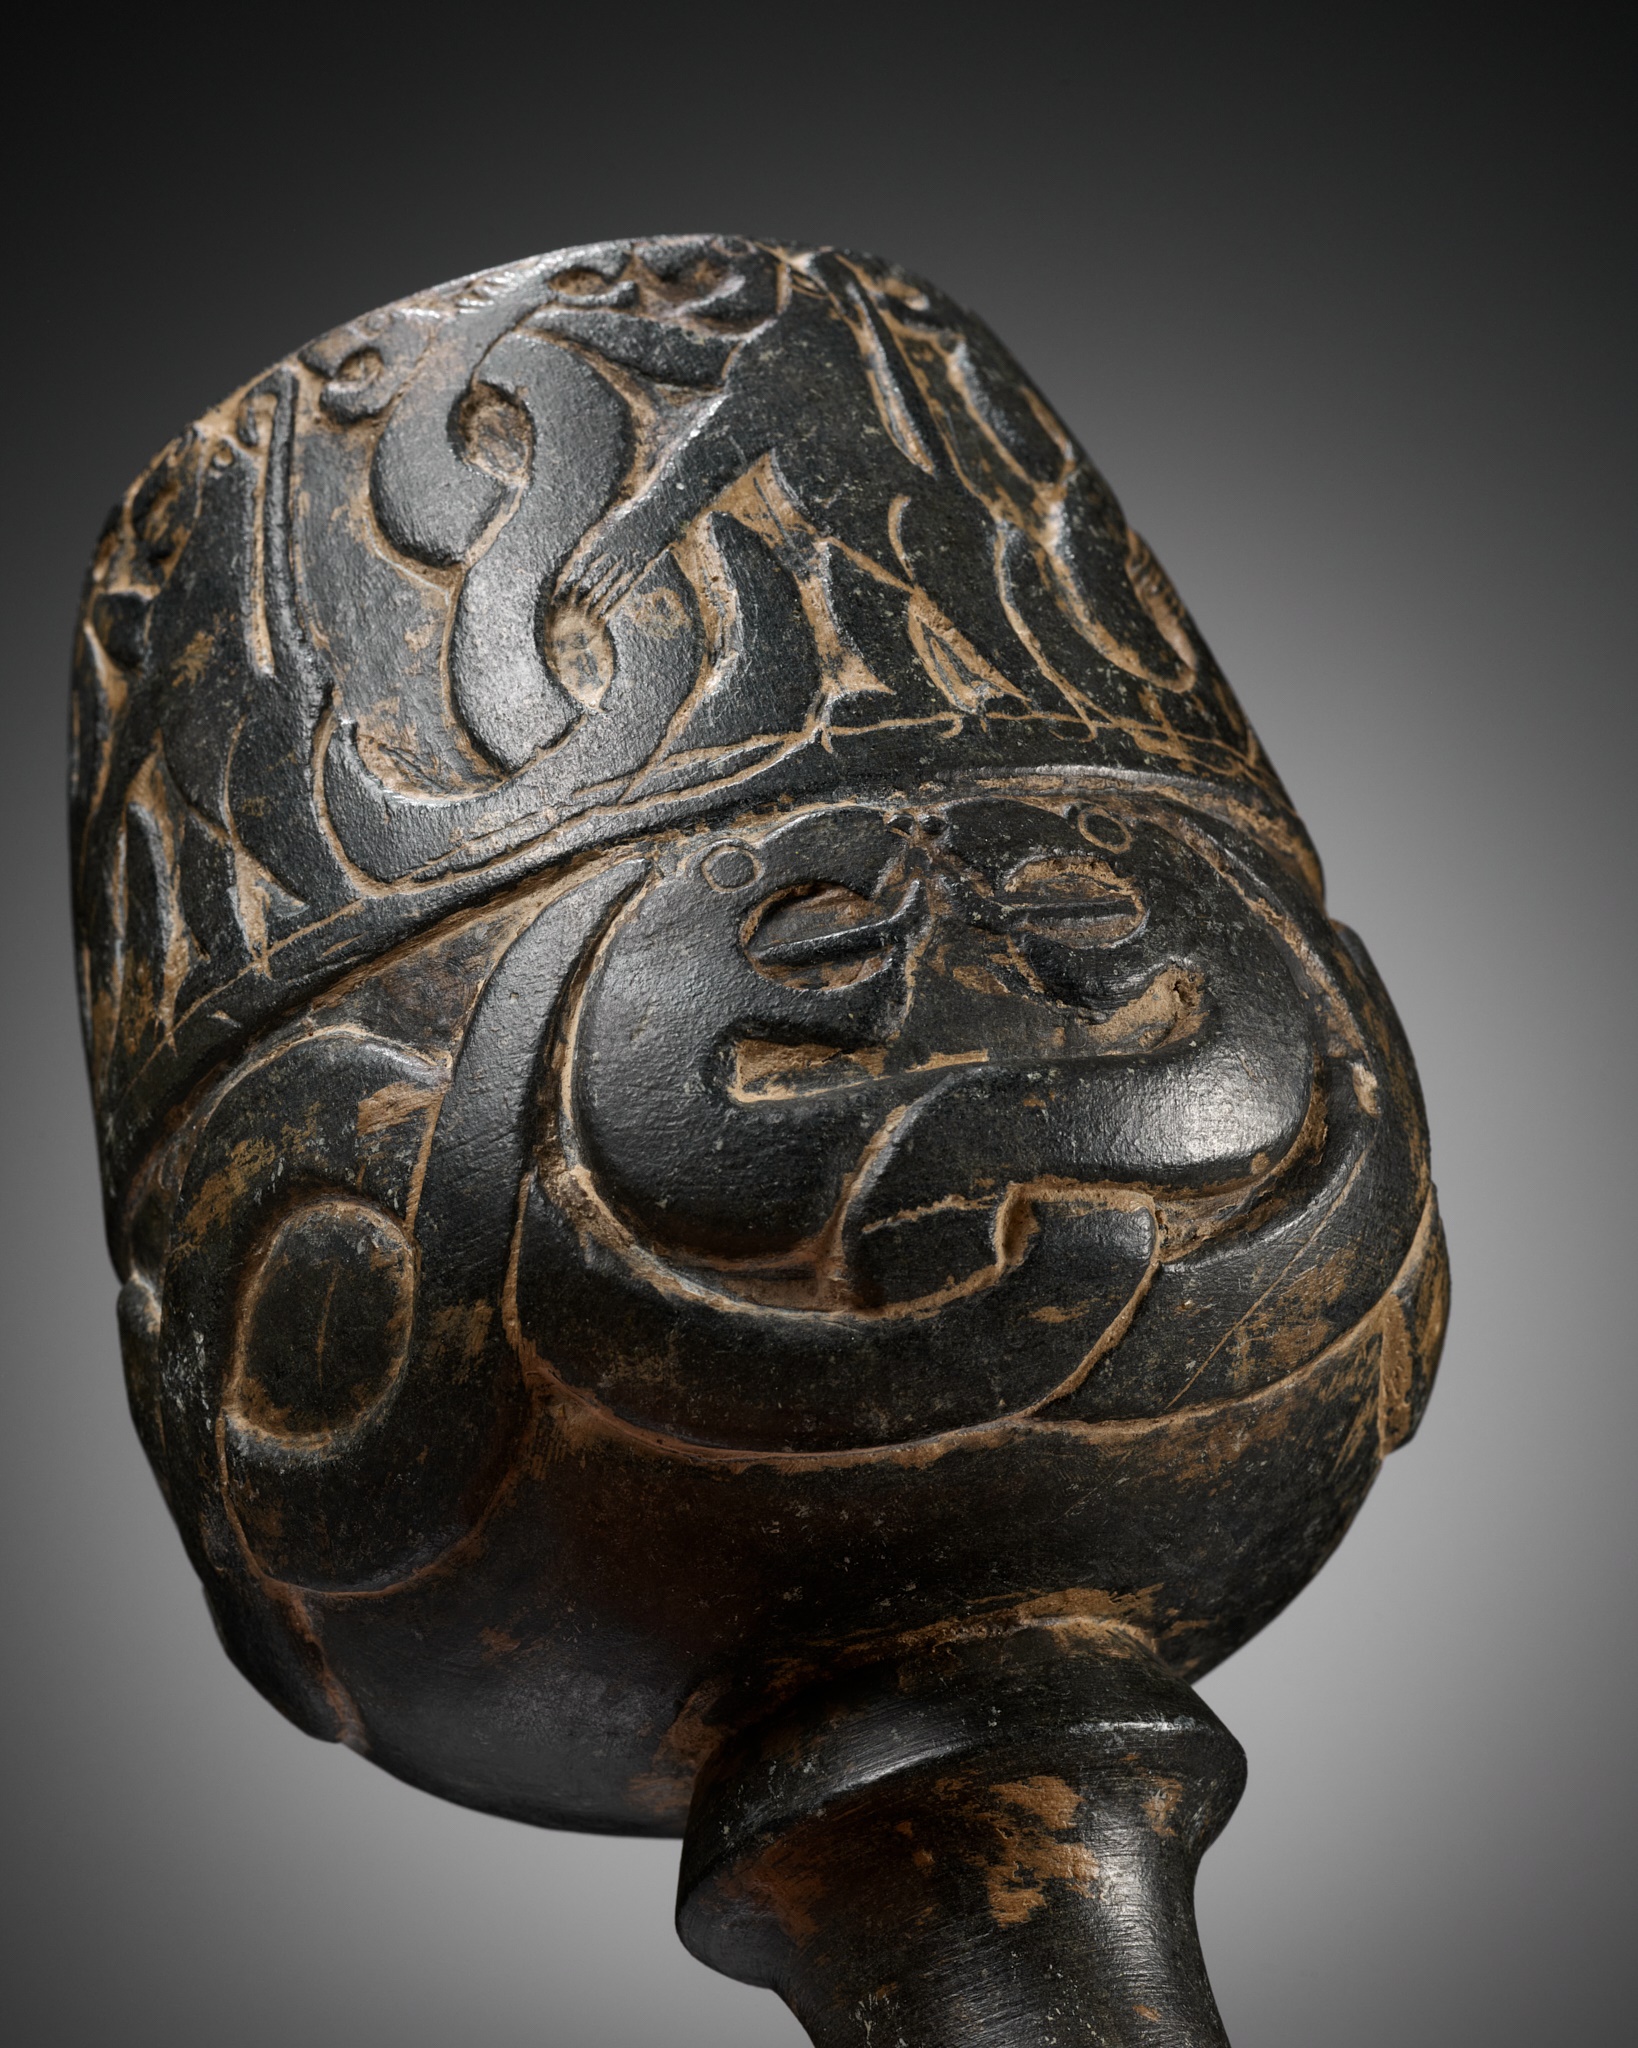 A LARGE AND HEAVY 'SNAKE AND LION' CHLORITE STEMCUP, JIROFT CULTURE, 3RD MILLENNIUM BC - Image 2 of 13